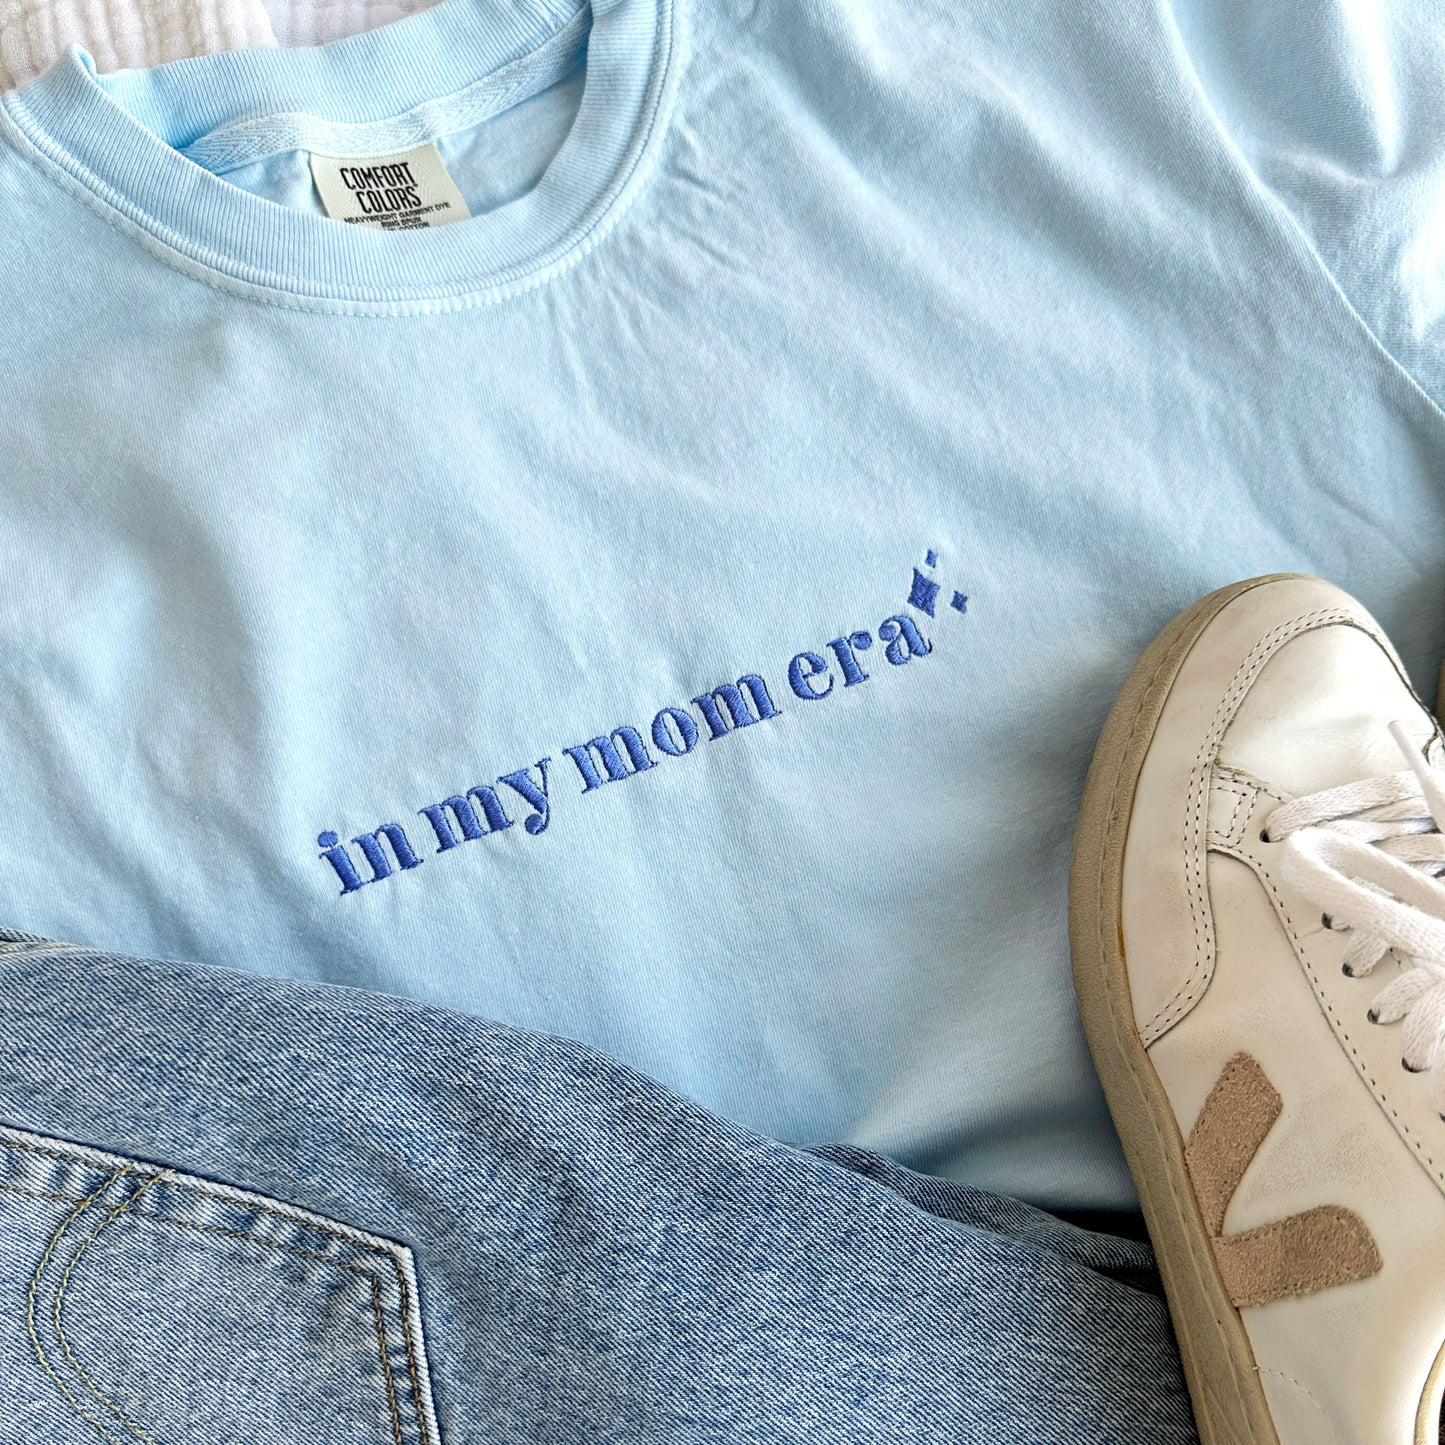 Chambray comfort colors t-shirt with embroidered in my mom era design across the chest in periwinkle thread styled with jeans and sneakers